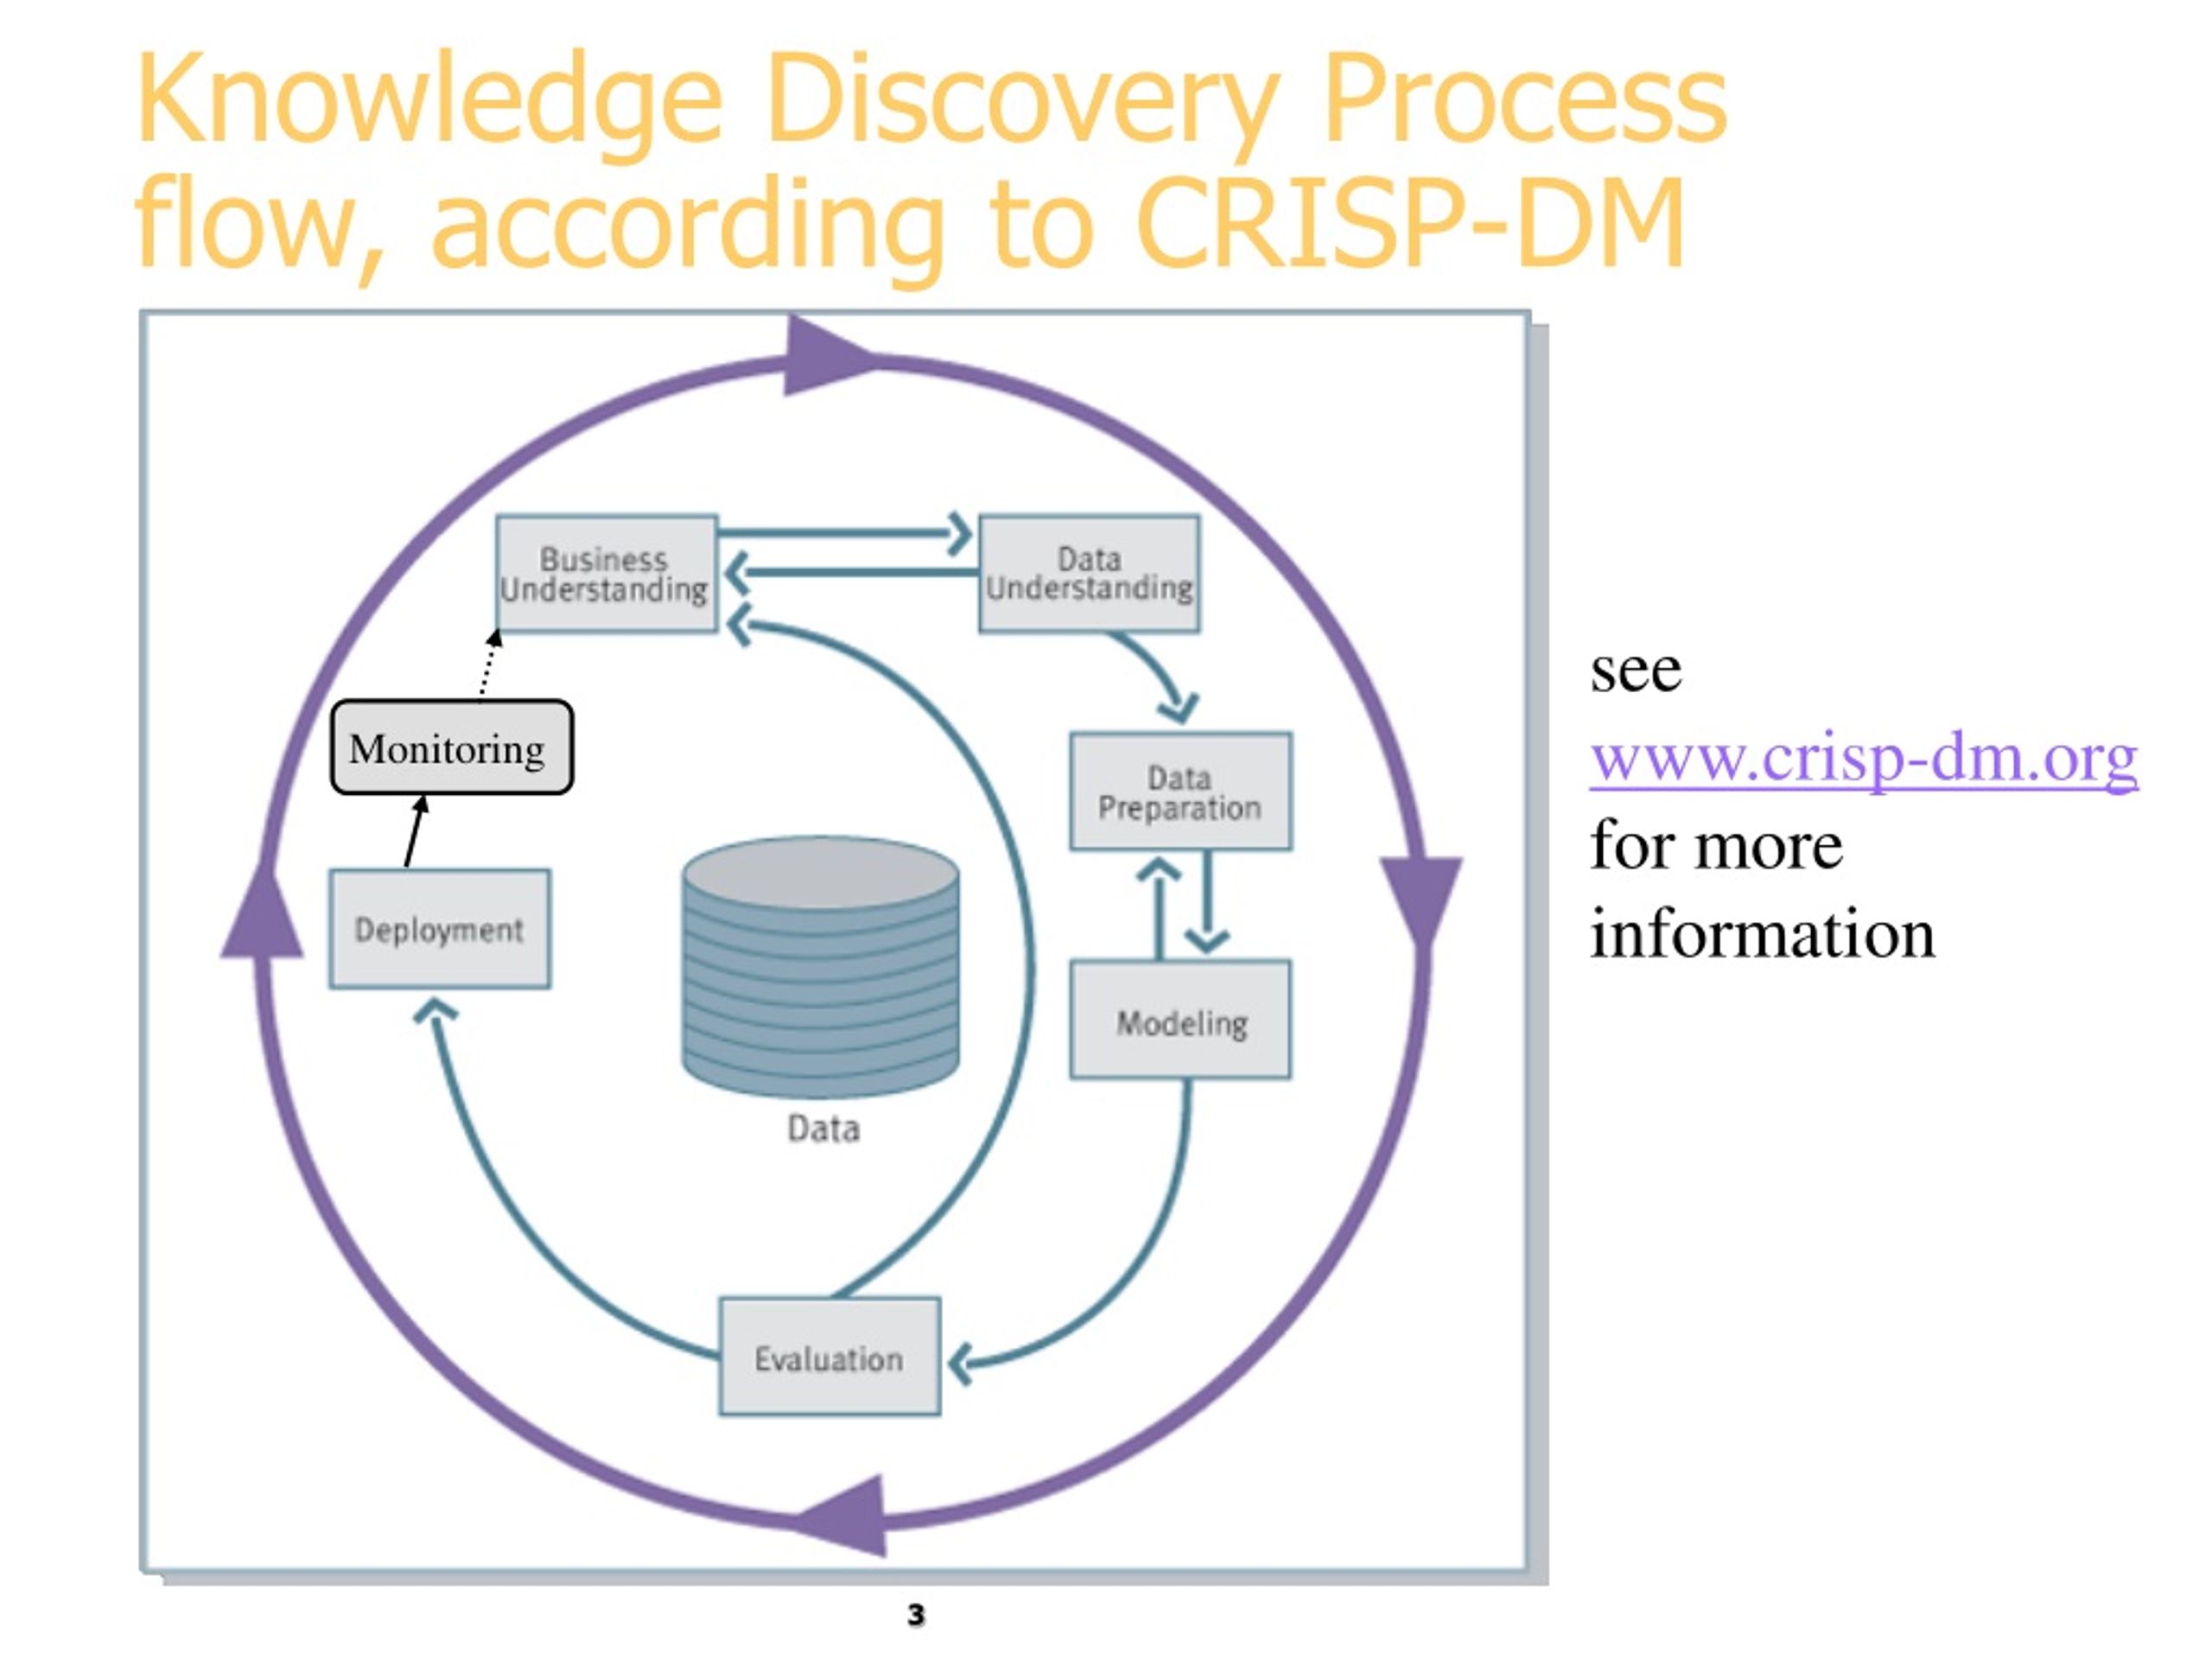 Discover data. KDD data Mining. Process Discovery. Crisp DM схема. Knowledge Discovery.